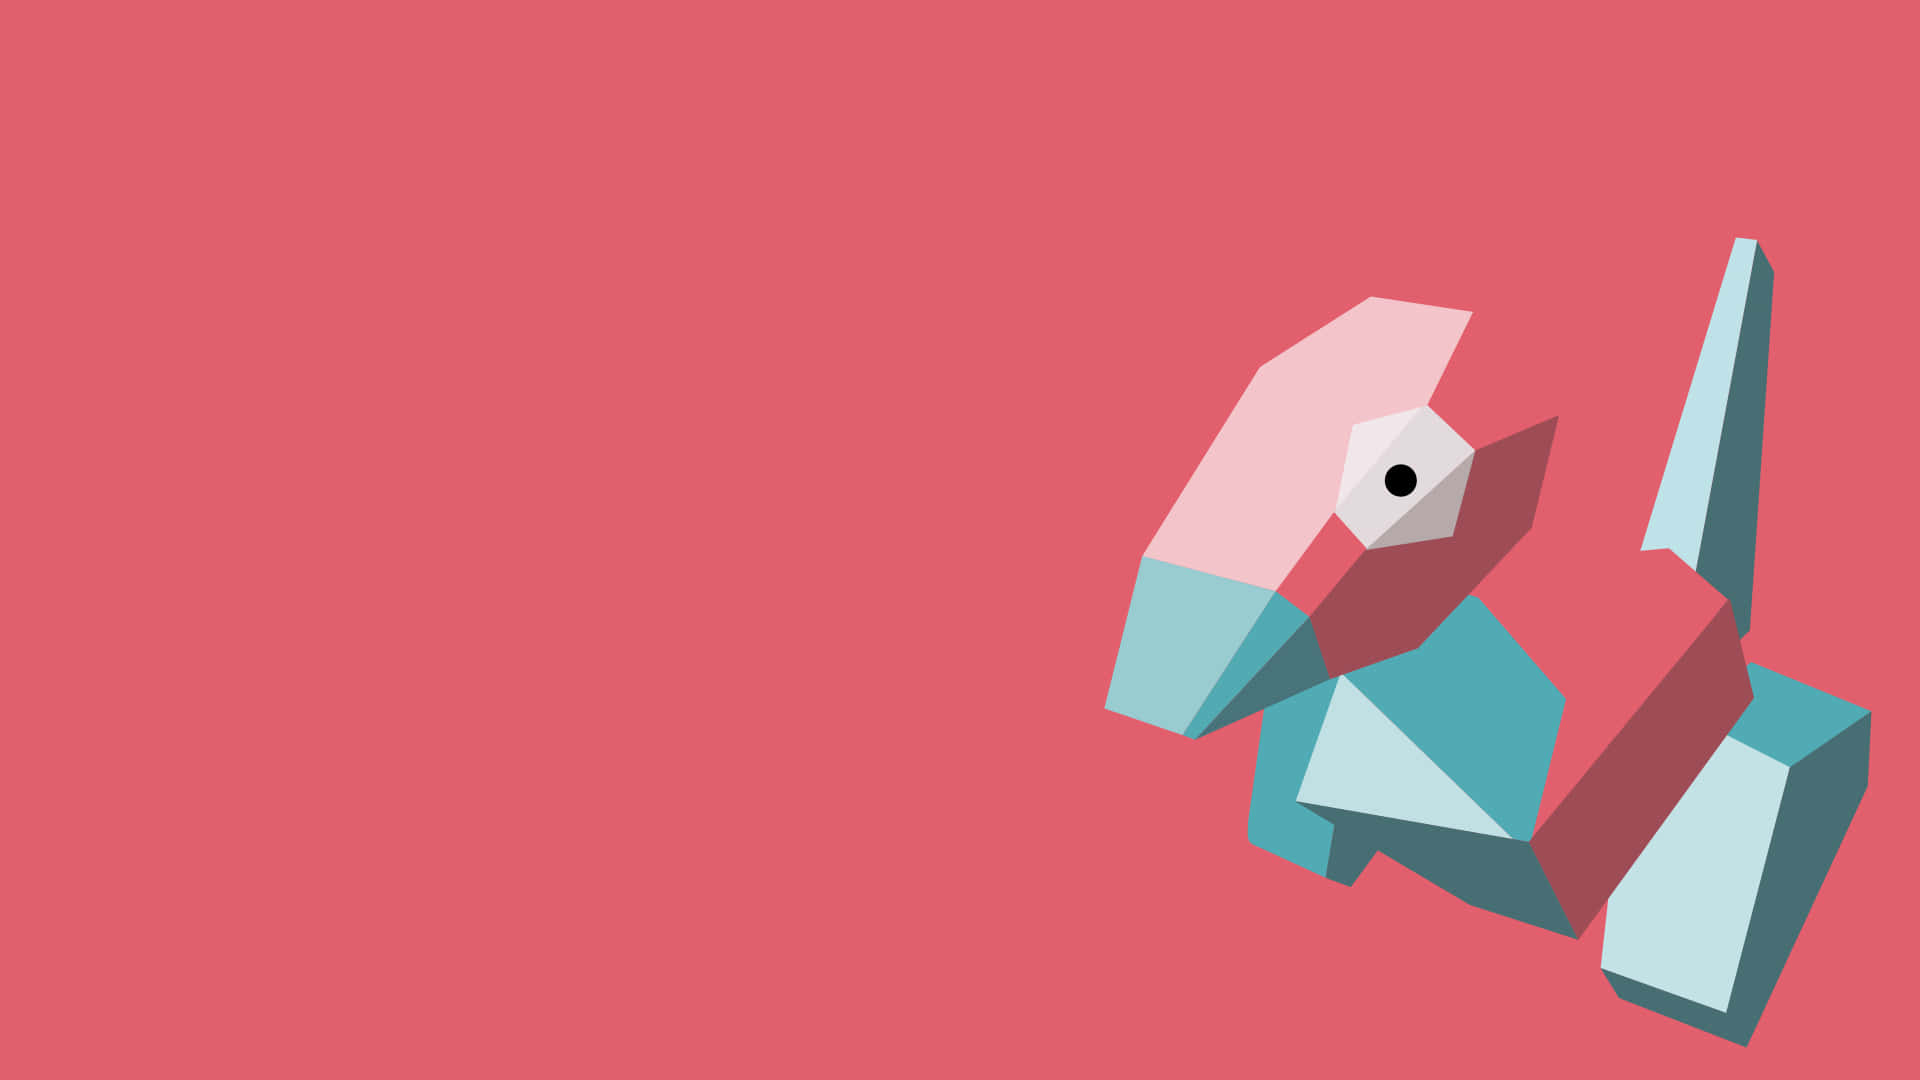 A Pink And Blue Origami - Styled Animal Wallpaper